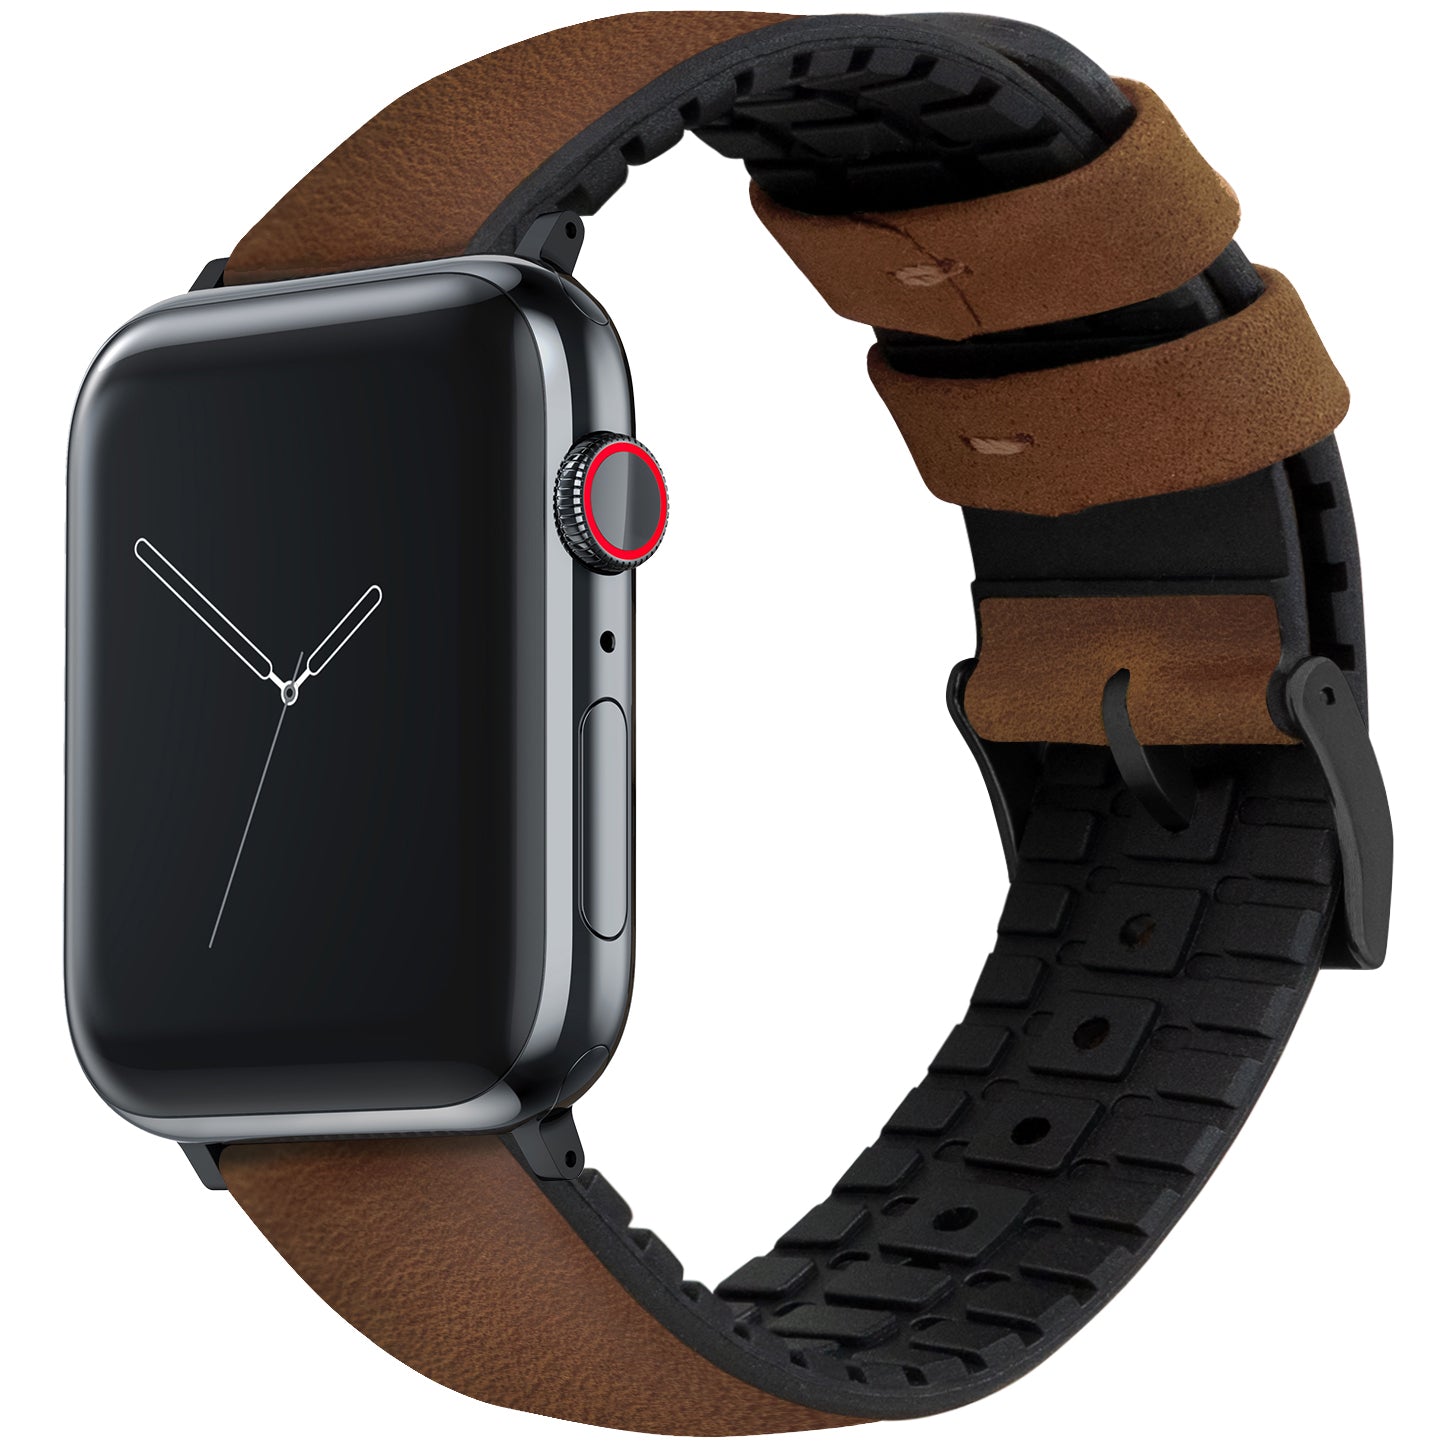 Apple Watch | Oak Brown Leather and Rubber Hybrid - Barton Watch Bands